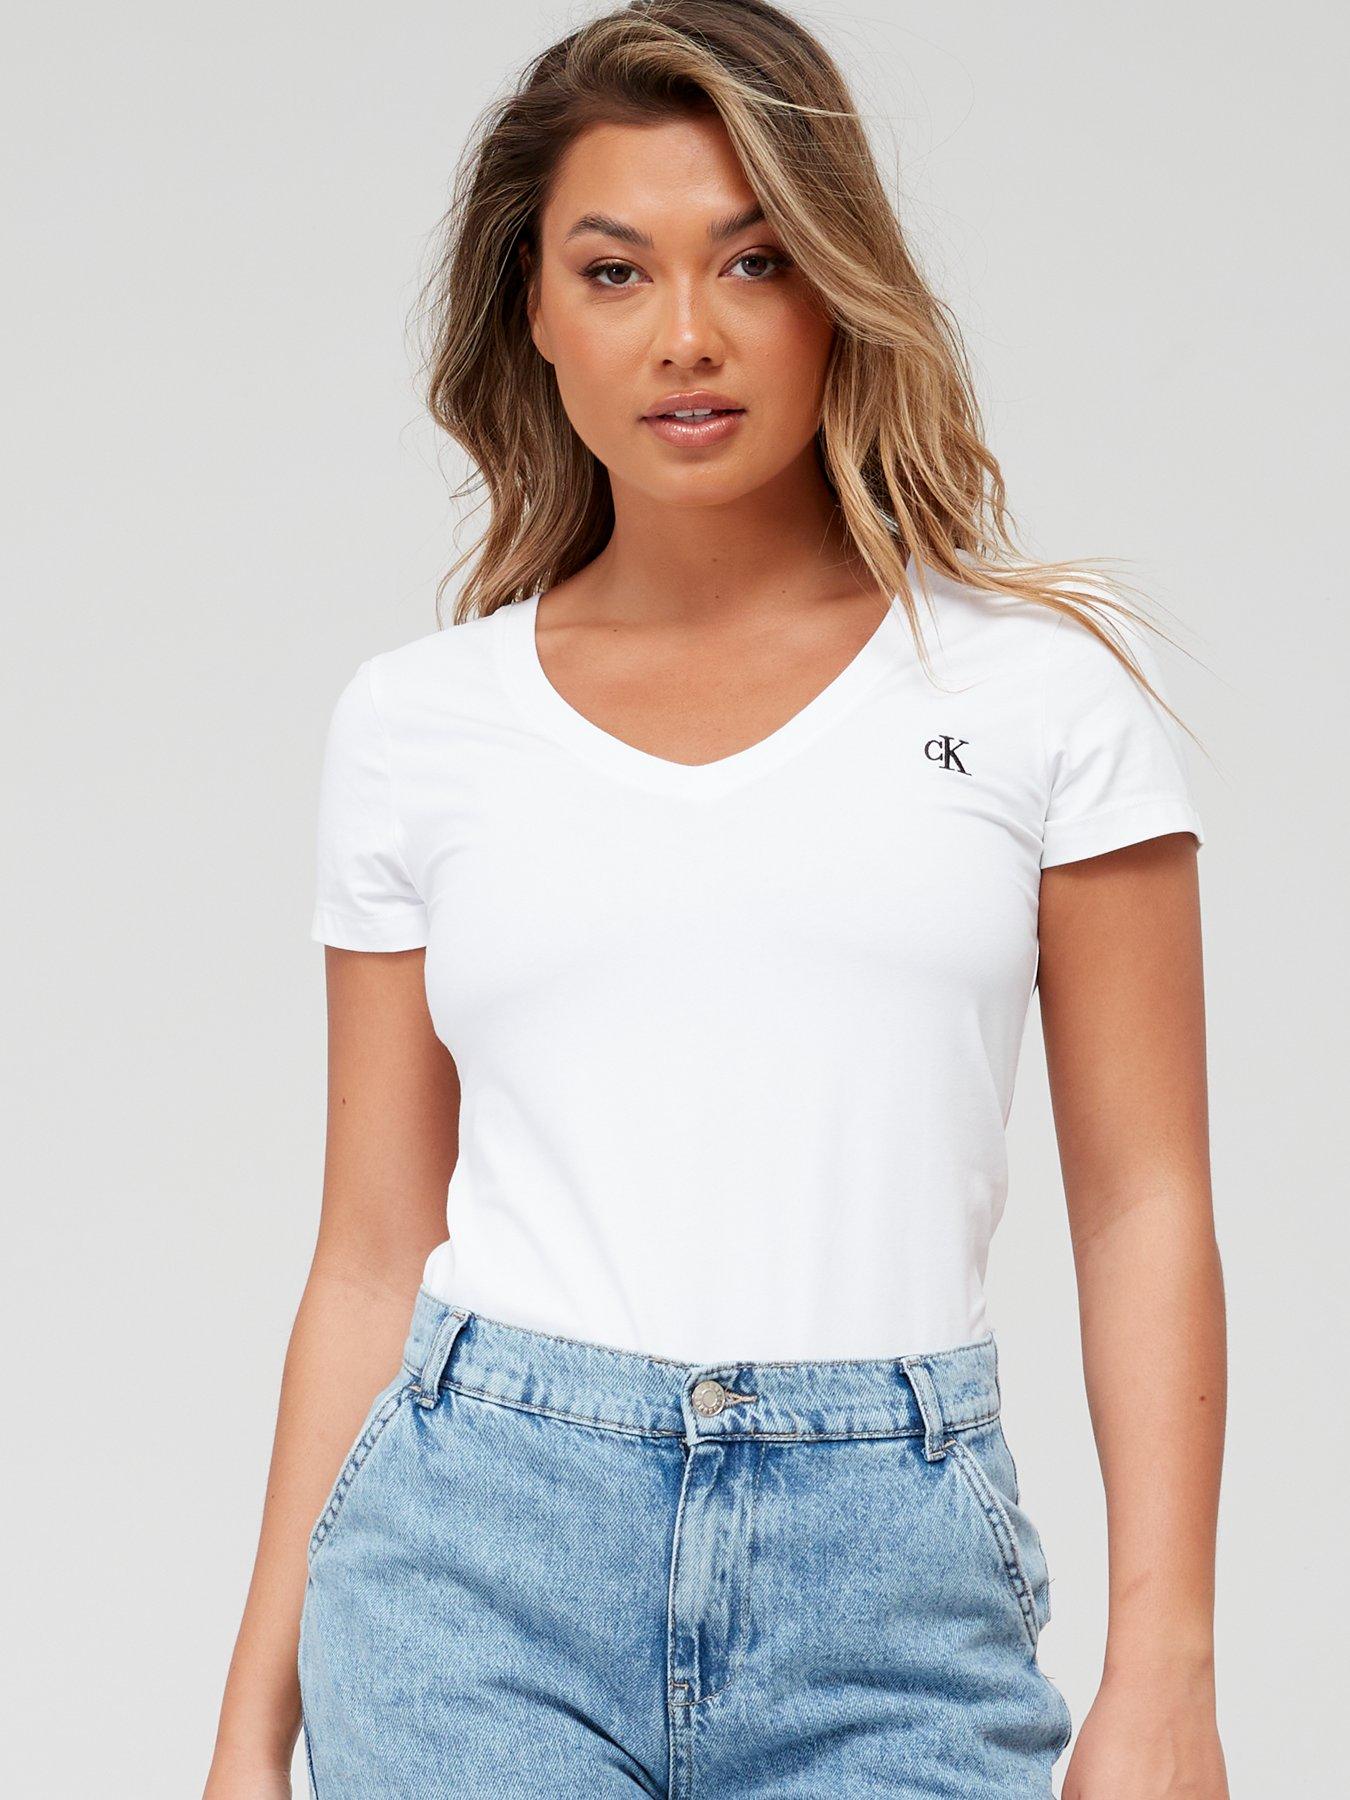 Casual Tops, White, Calvin klein jeans, Tops & t-shirts, Women